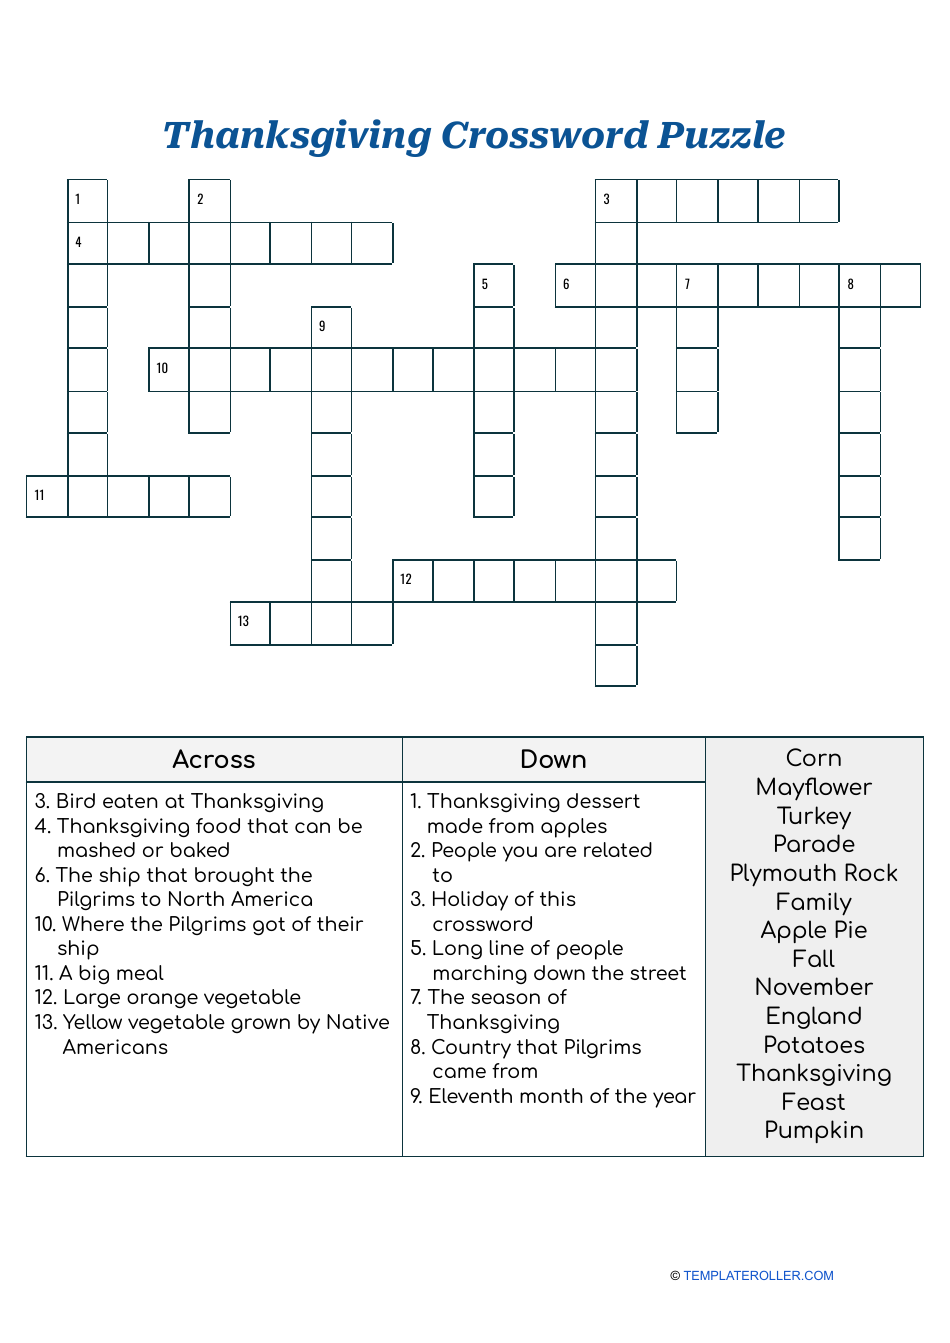 A preview image of the Thanksgiving Crossword Puzzle.